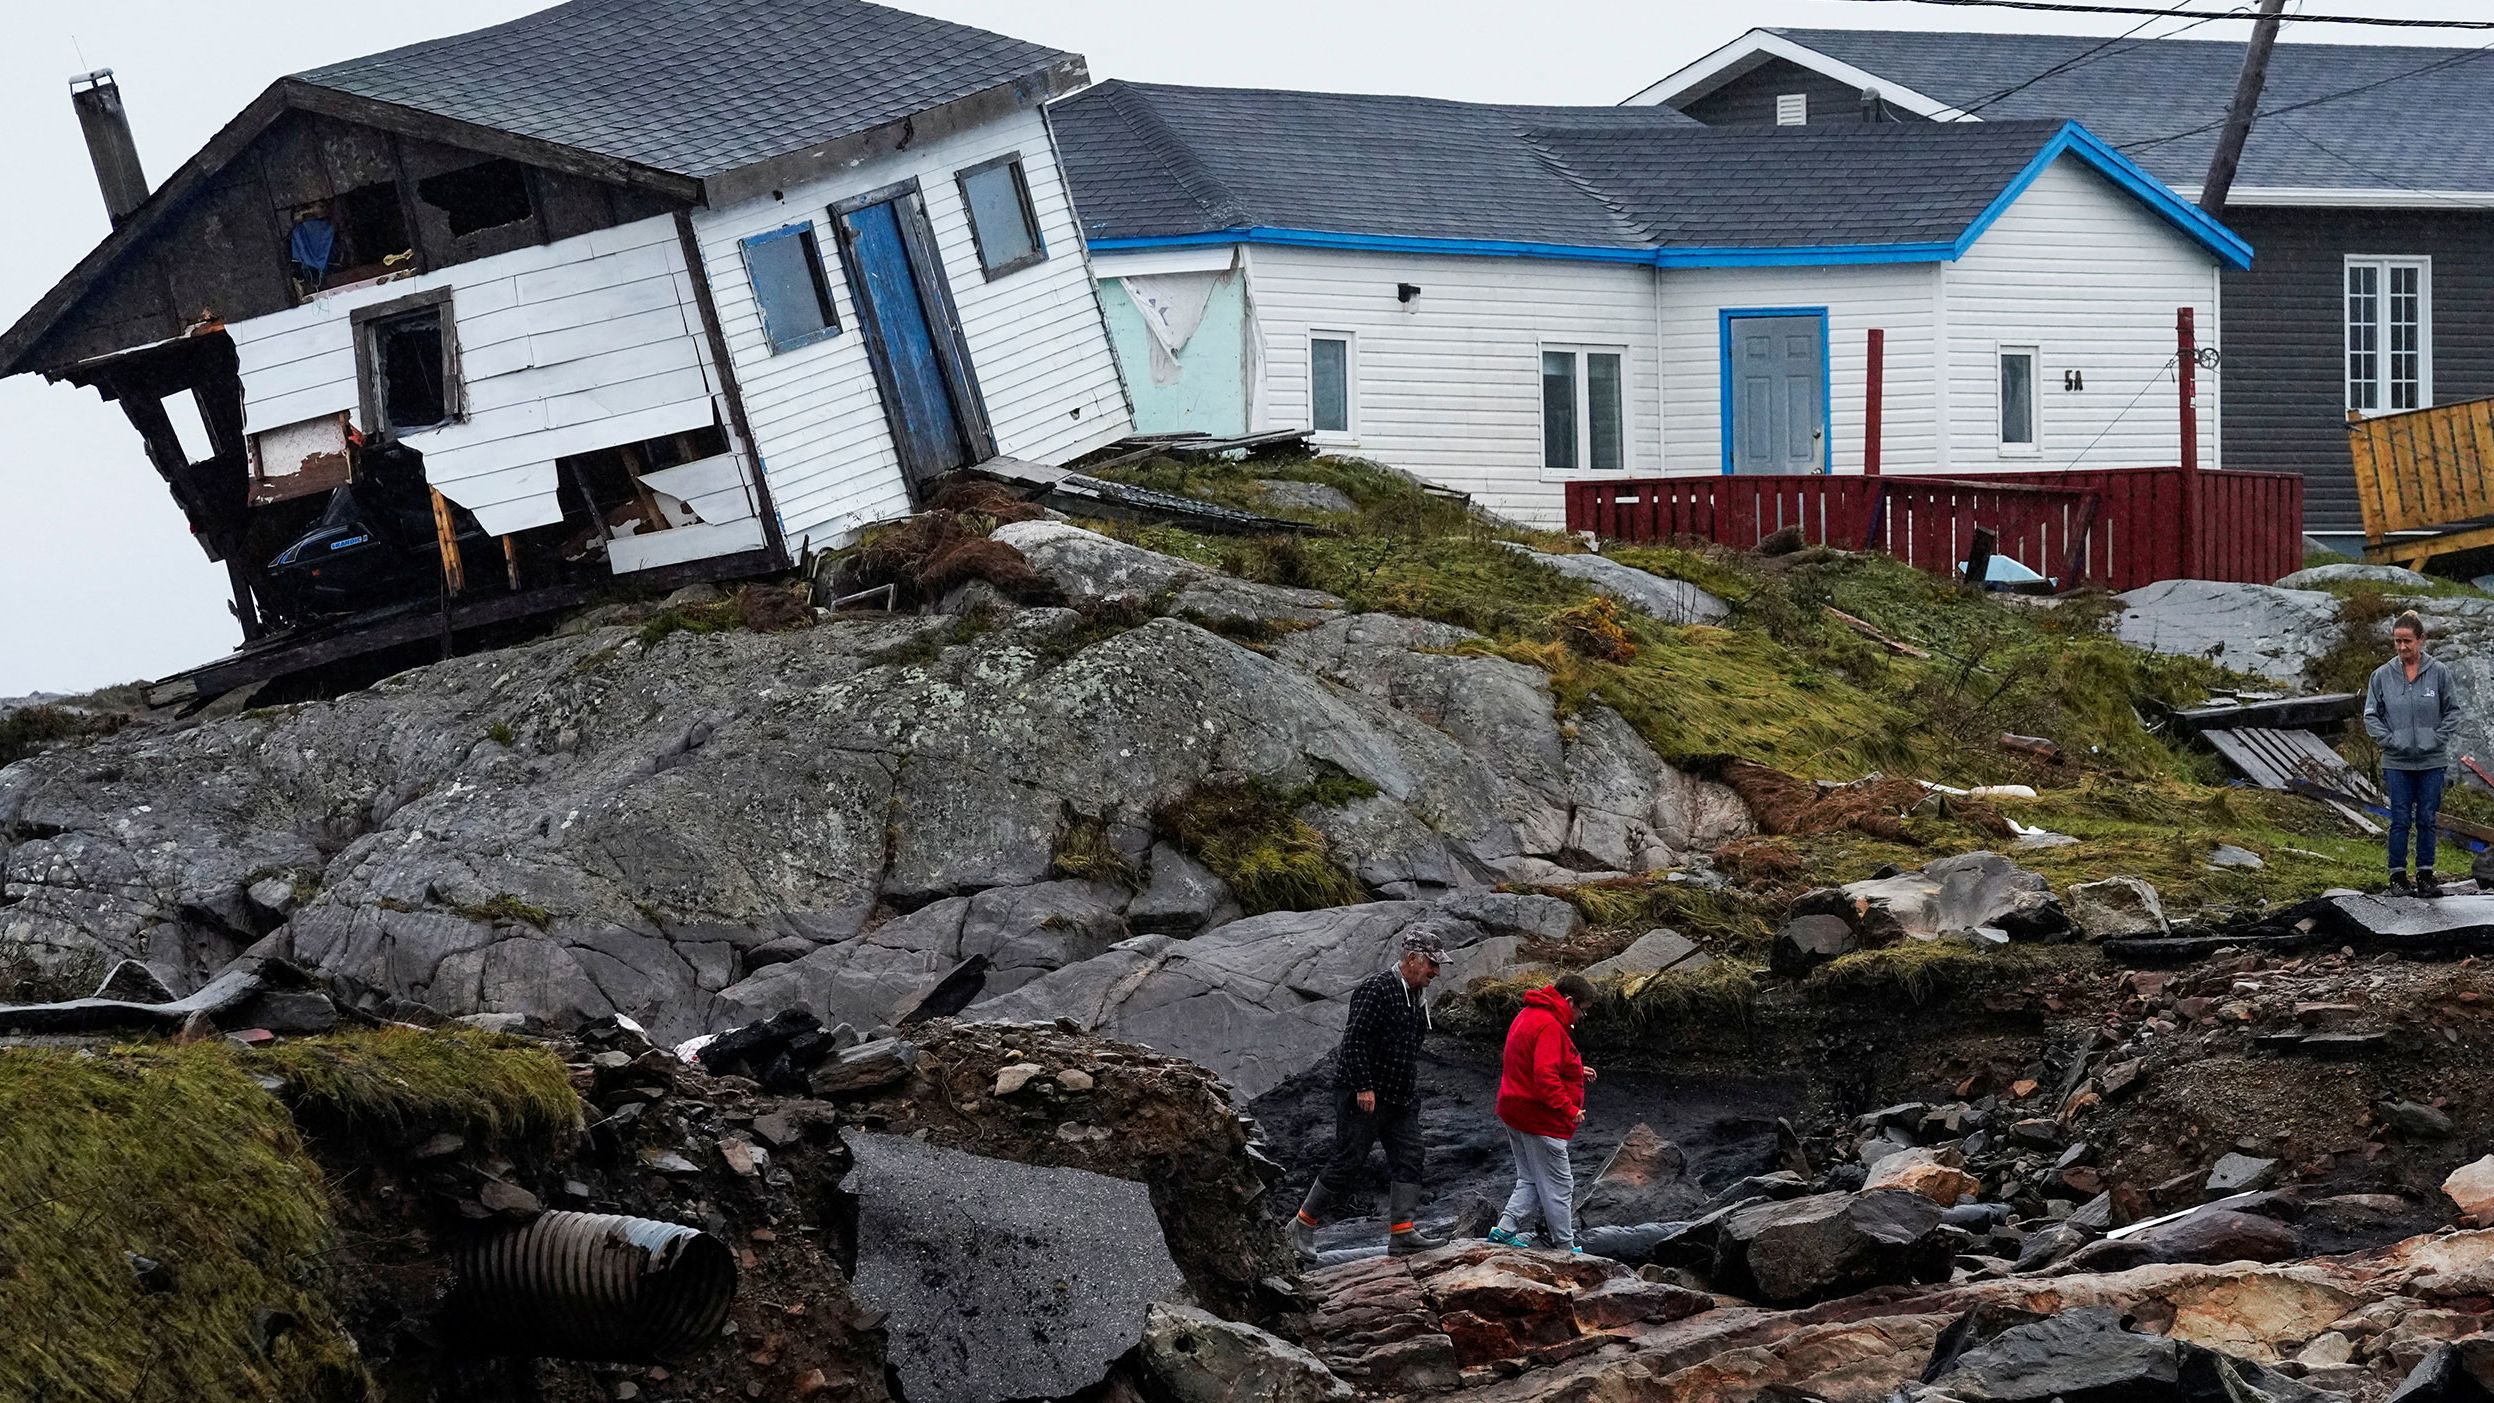 People head to their homes in Canada's Burnt Islands on Tuesday, September 27. The storm named Fiona <a href="http://www.cnn.com/2022/09/24/weather/gallery/hurricane-fiona-canada/index.html" target="_blank">slammed into Canada's eastern seaboard</a> with hurricane-force winds and torrential rainfall.